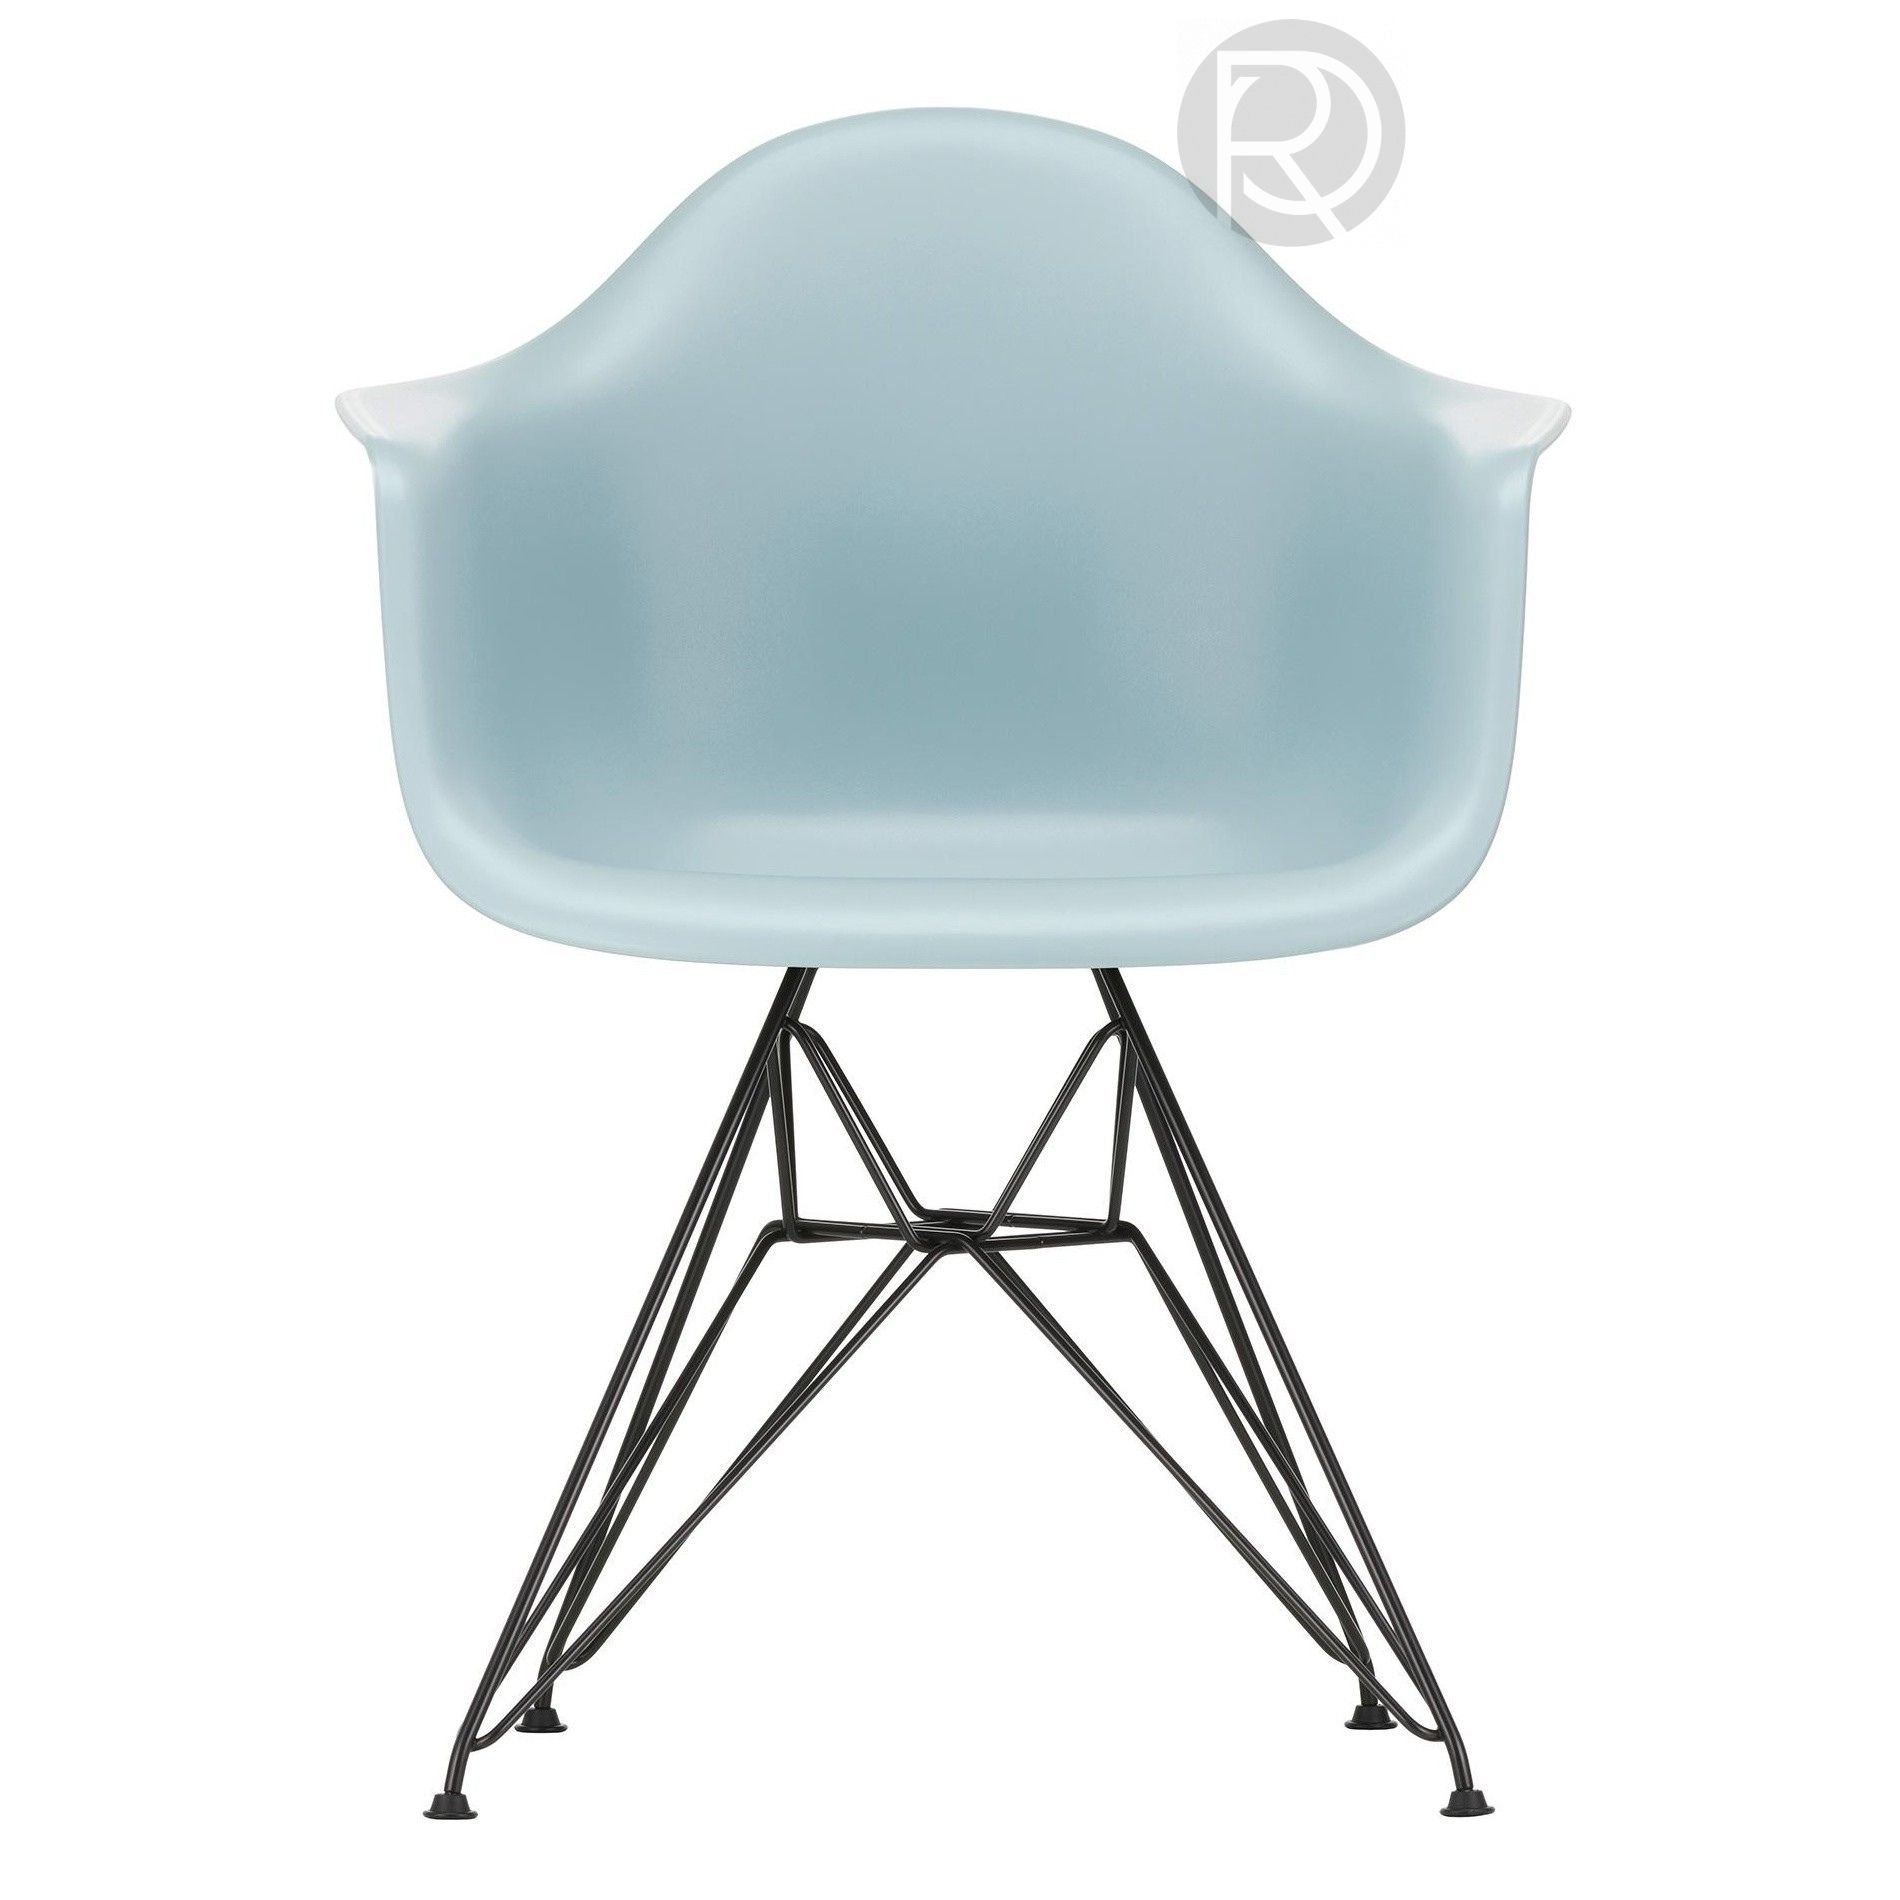 EAMES chair by Vitra